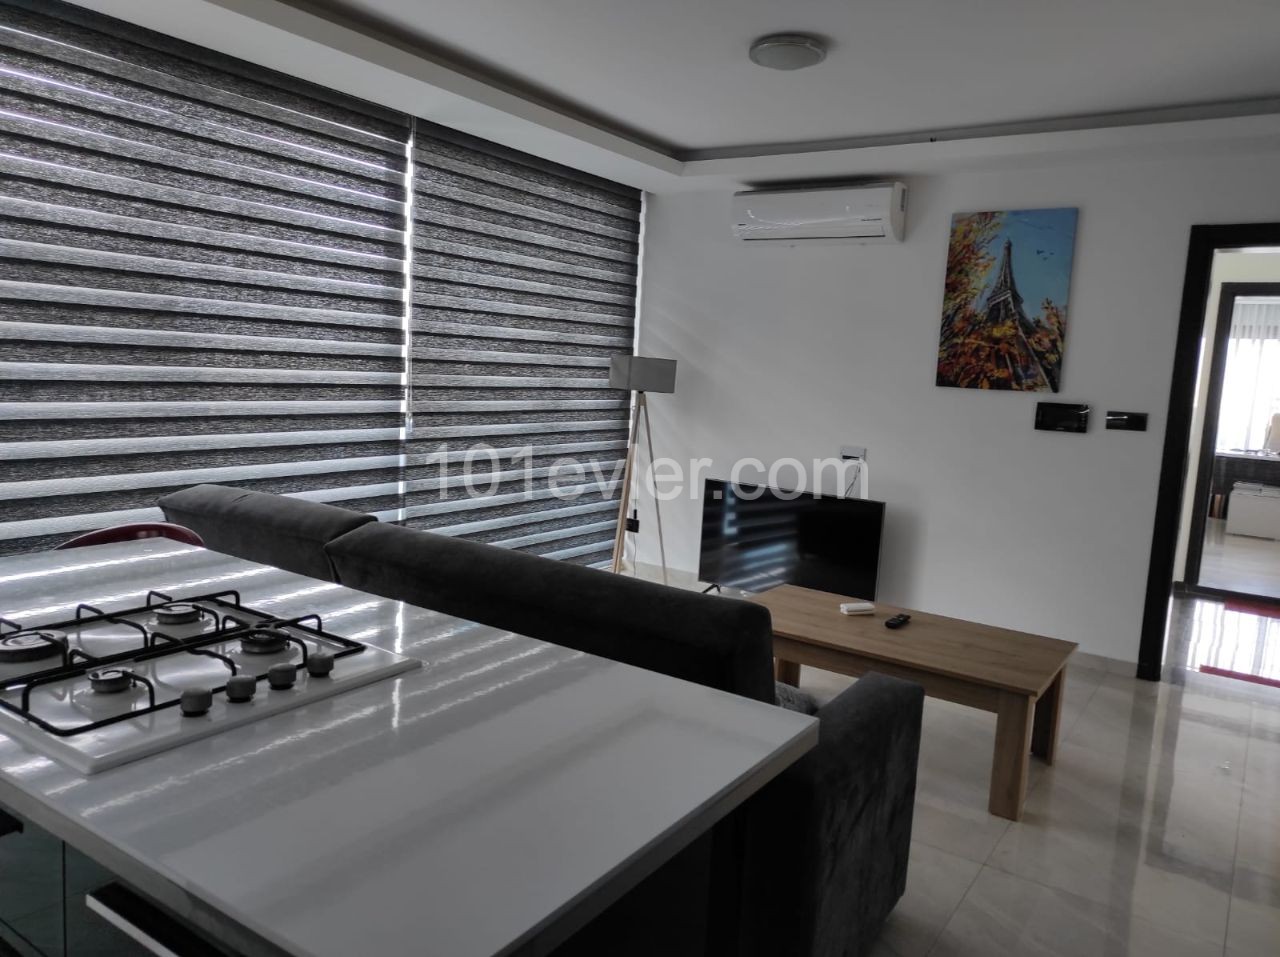 Two Bedroom Apartment for Rent in Girne